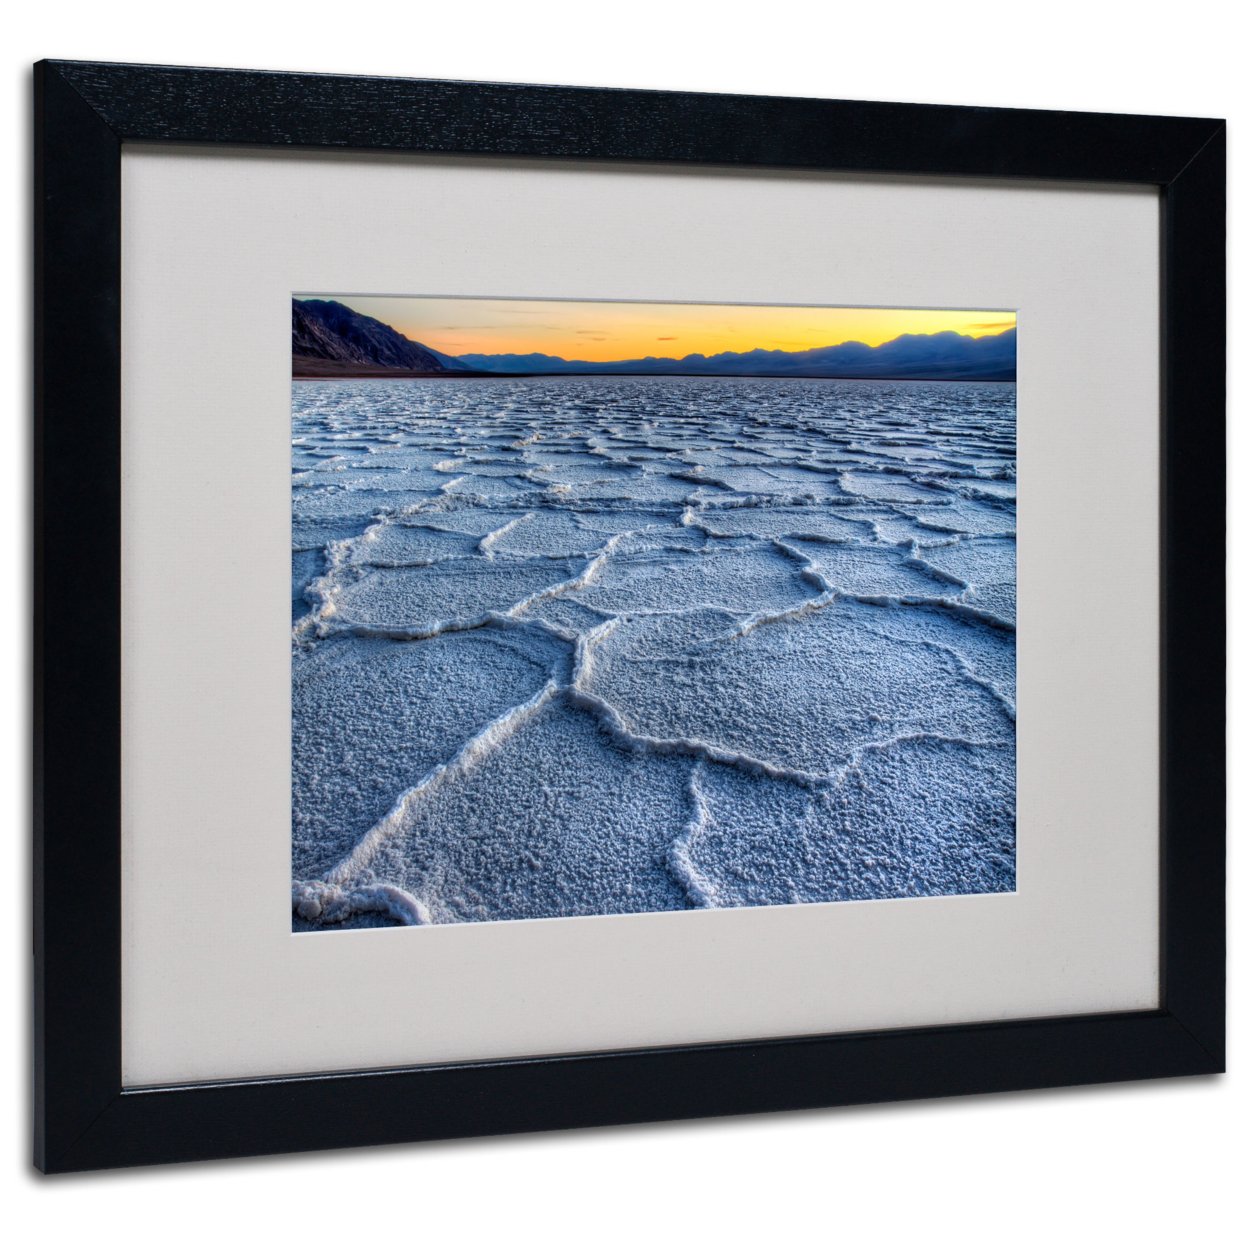 Pierre Leclerc 'Badwater' Black Wooden Framed Art 18 X 22 Inches